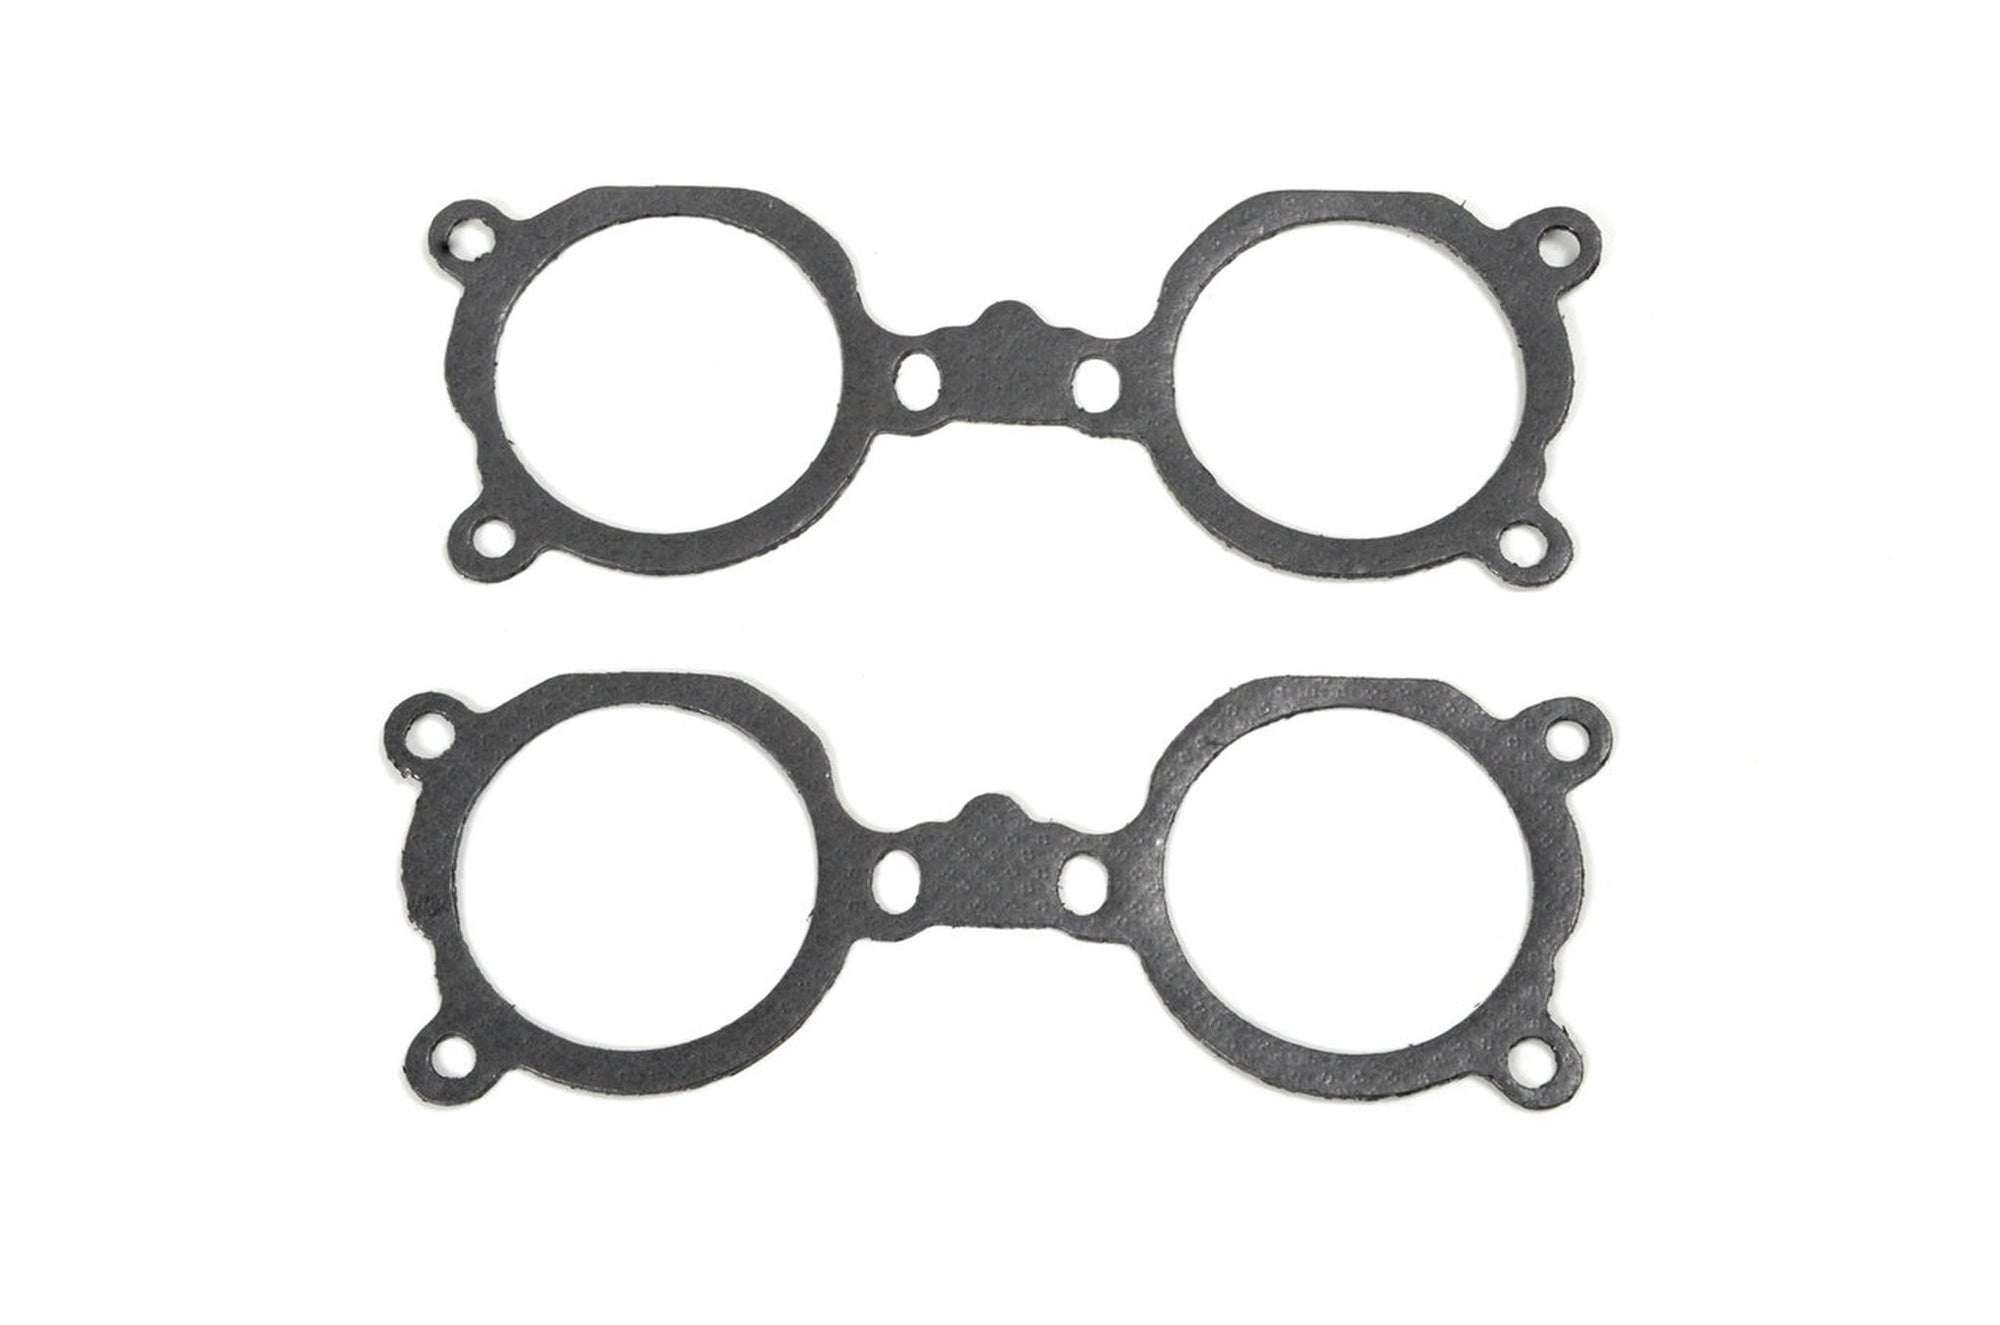 Grimmspeed Manifold-to-TGV-assembly gasket (top)